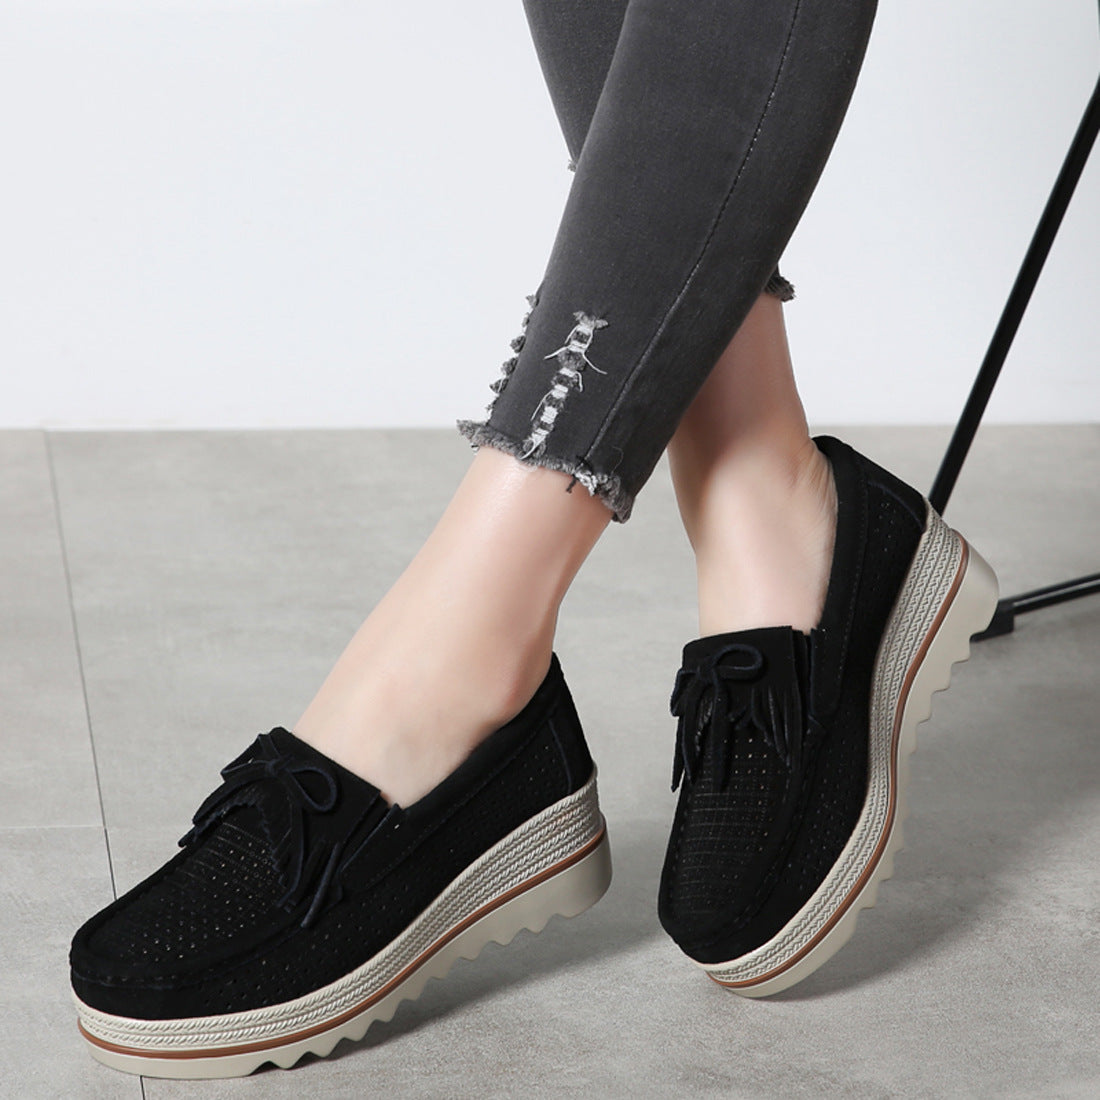 Women's Autumn Casual Genuine Leather Loafers